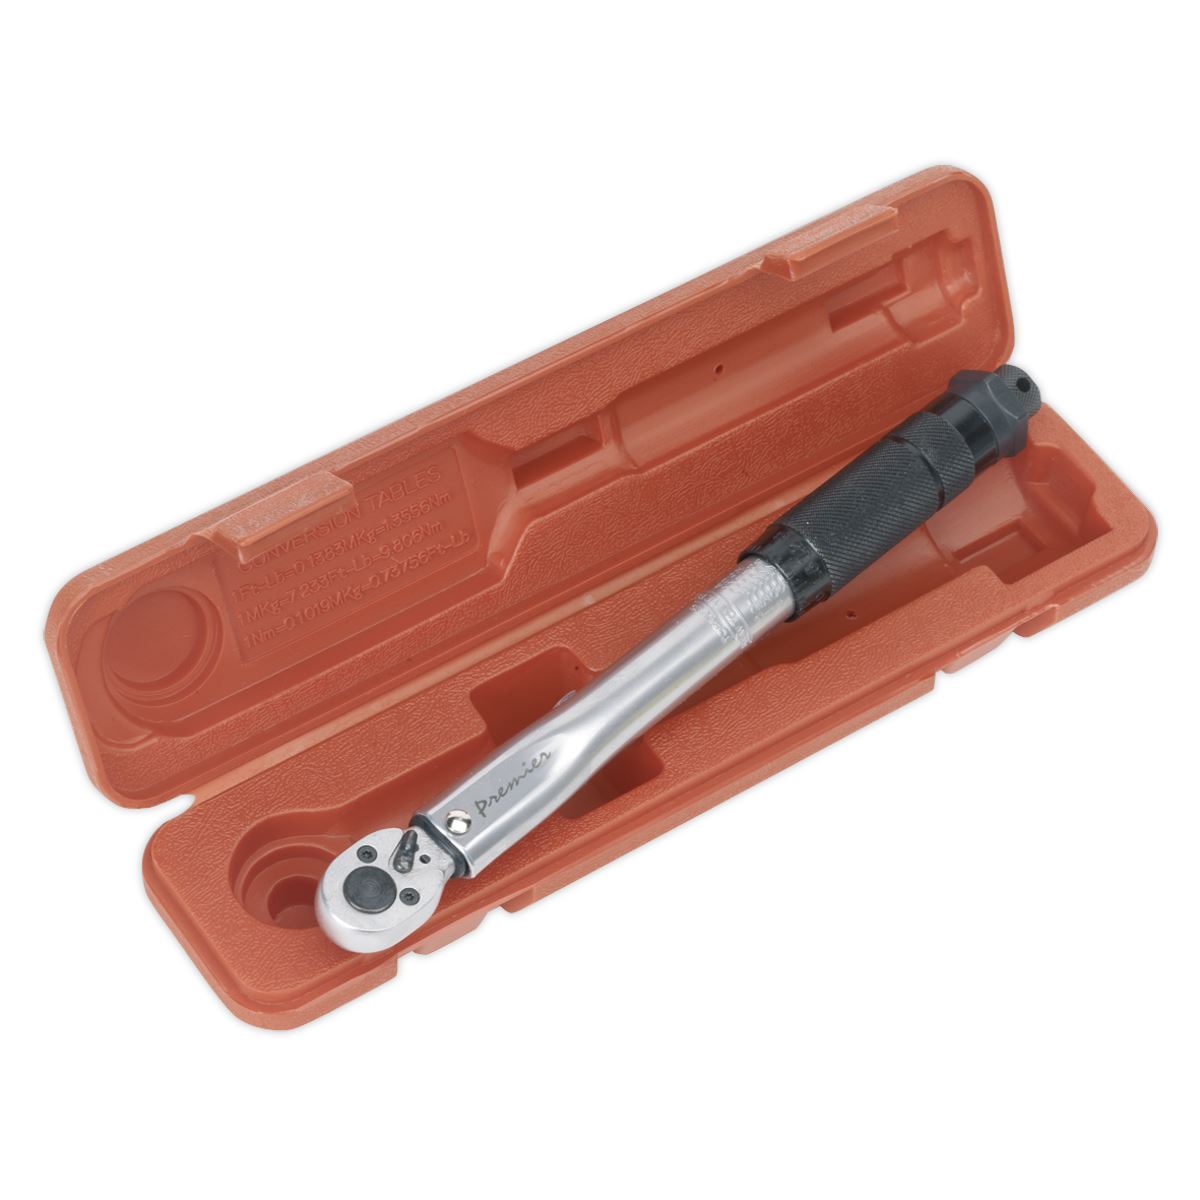 Sealey Premier Torque Wrench Micrometer Style 3/8"Sq Drive 2-24Nm(1.47-17.70lb.ft) - Calibrated